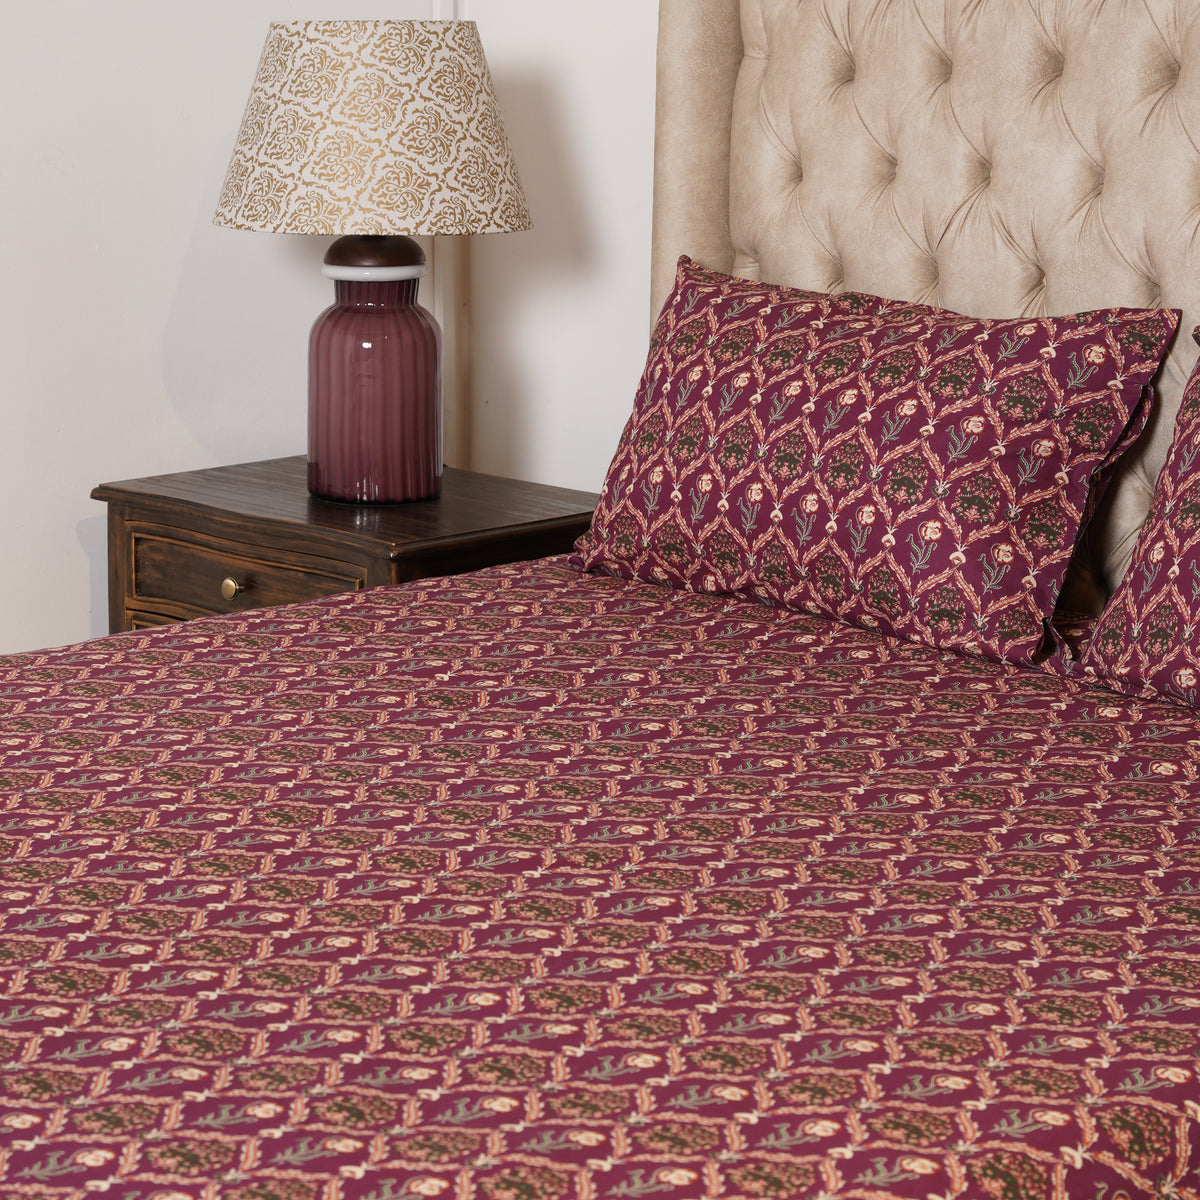 Bedsheets- Wild Aster (King Size)